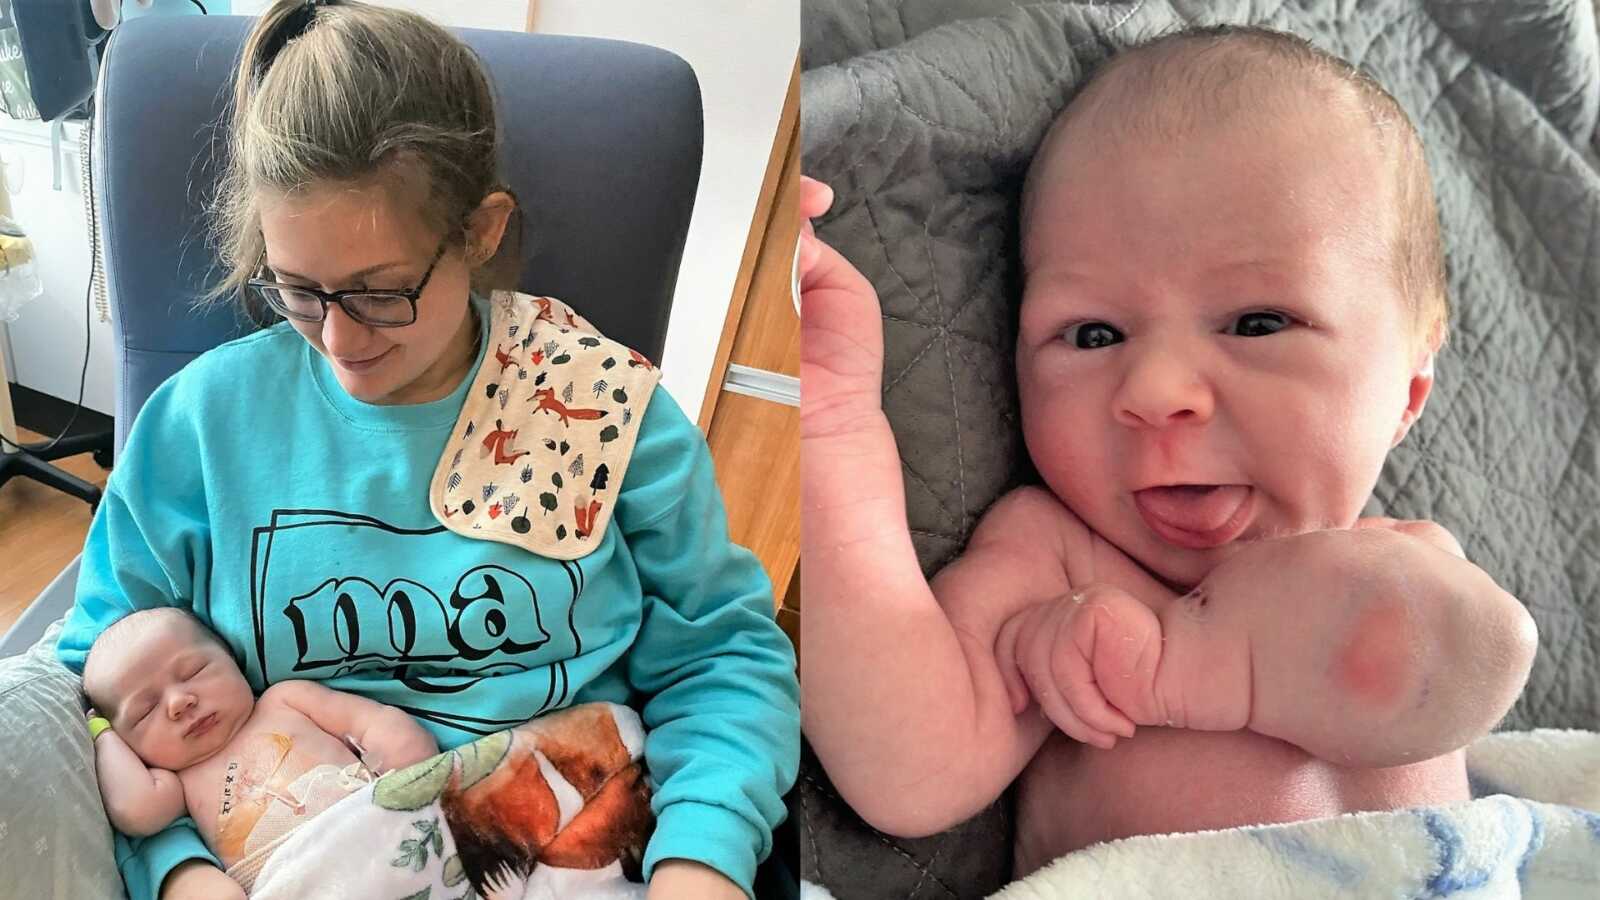 On the left, mom holds newborn baby. On the right, mom takes photo of newborn baby's swollen arm